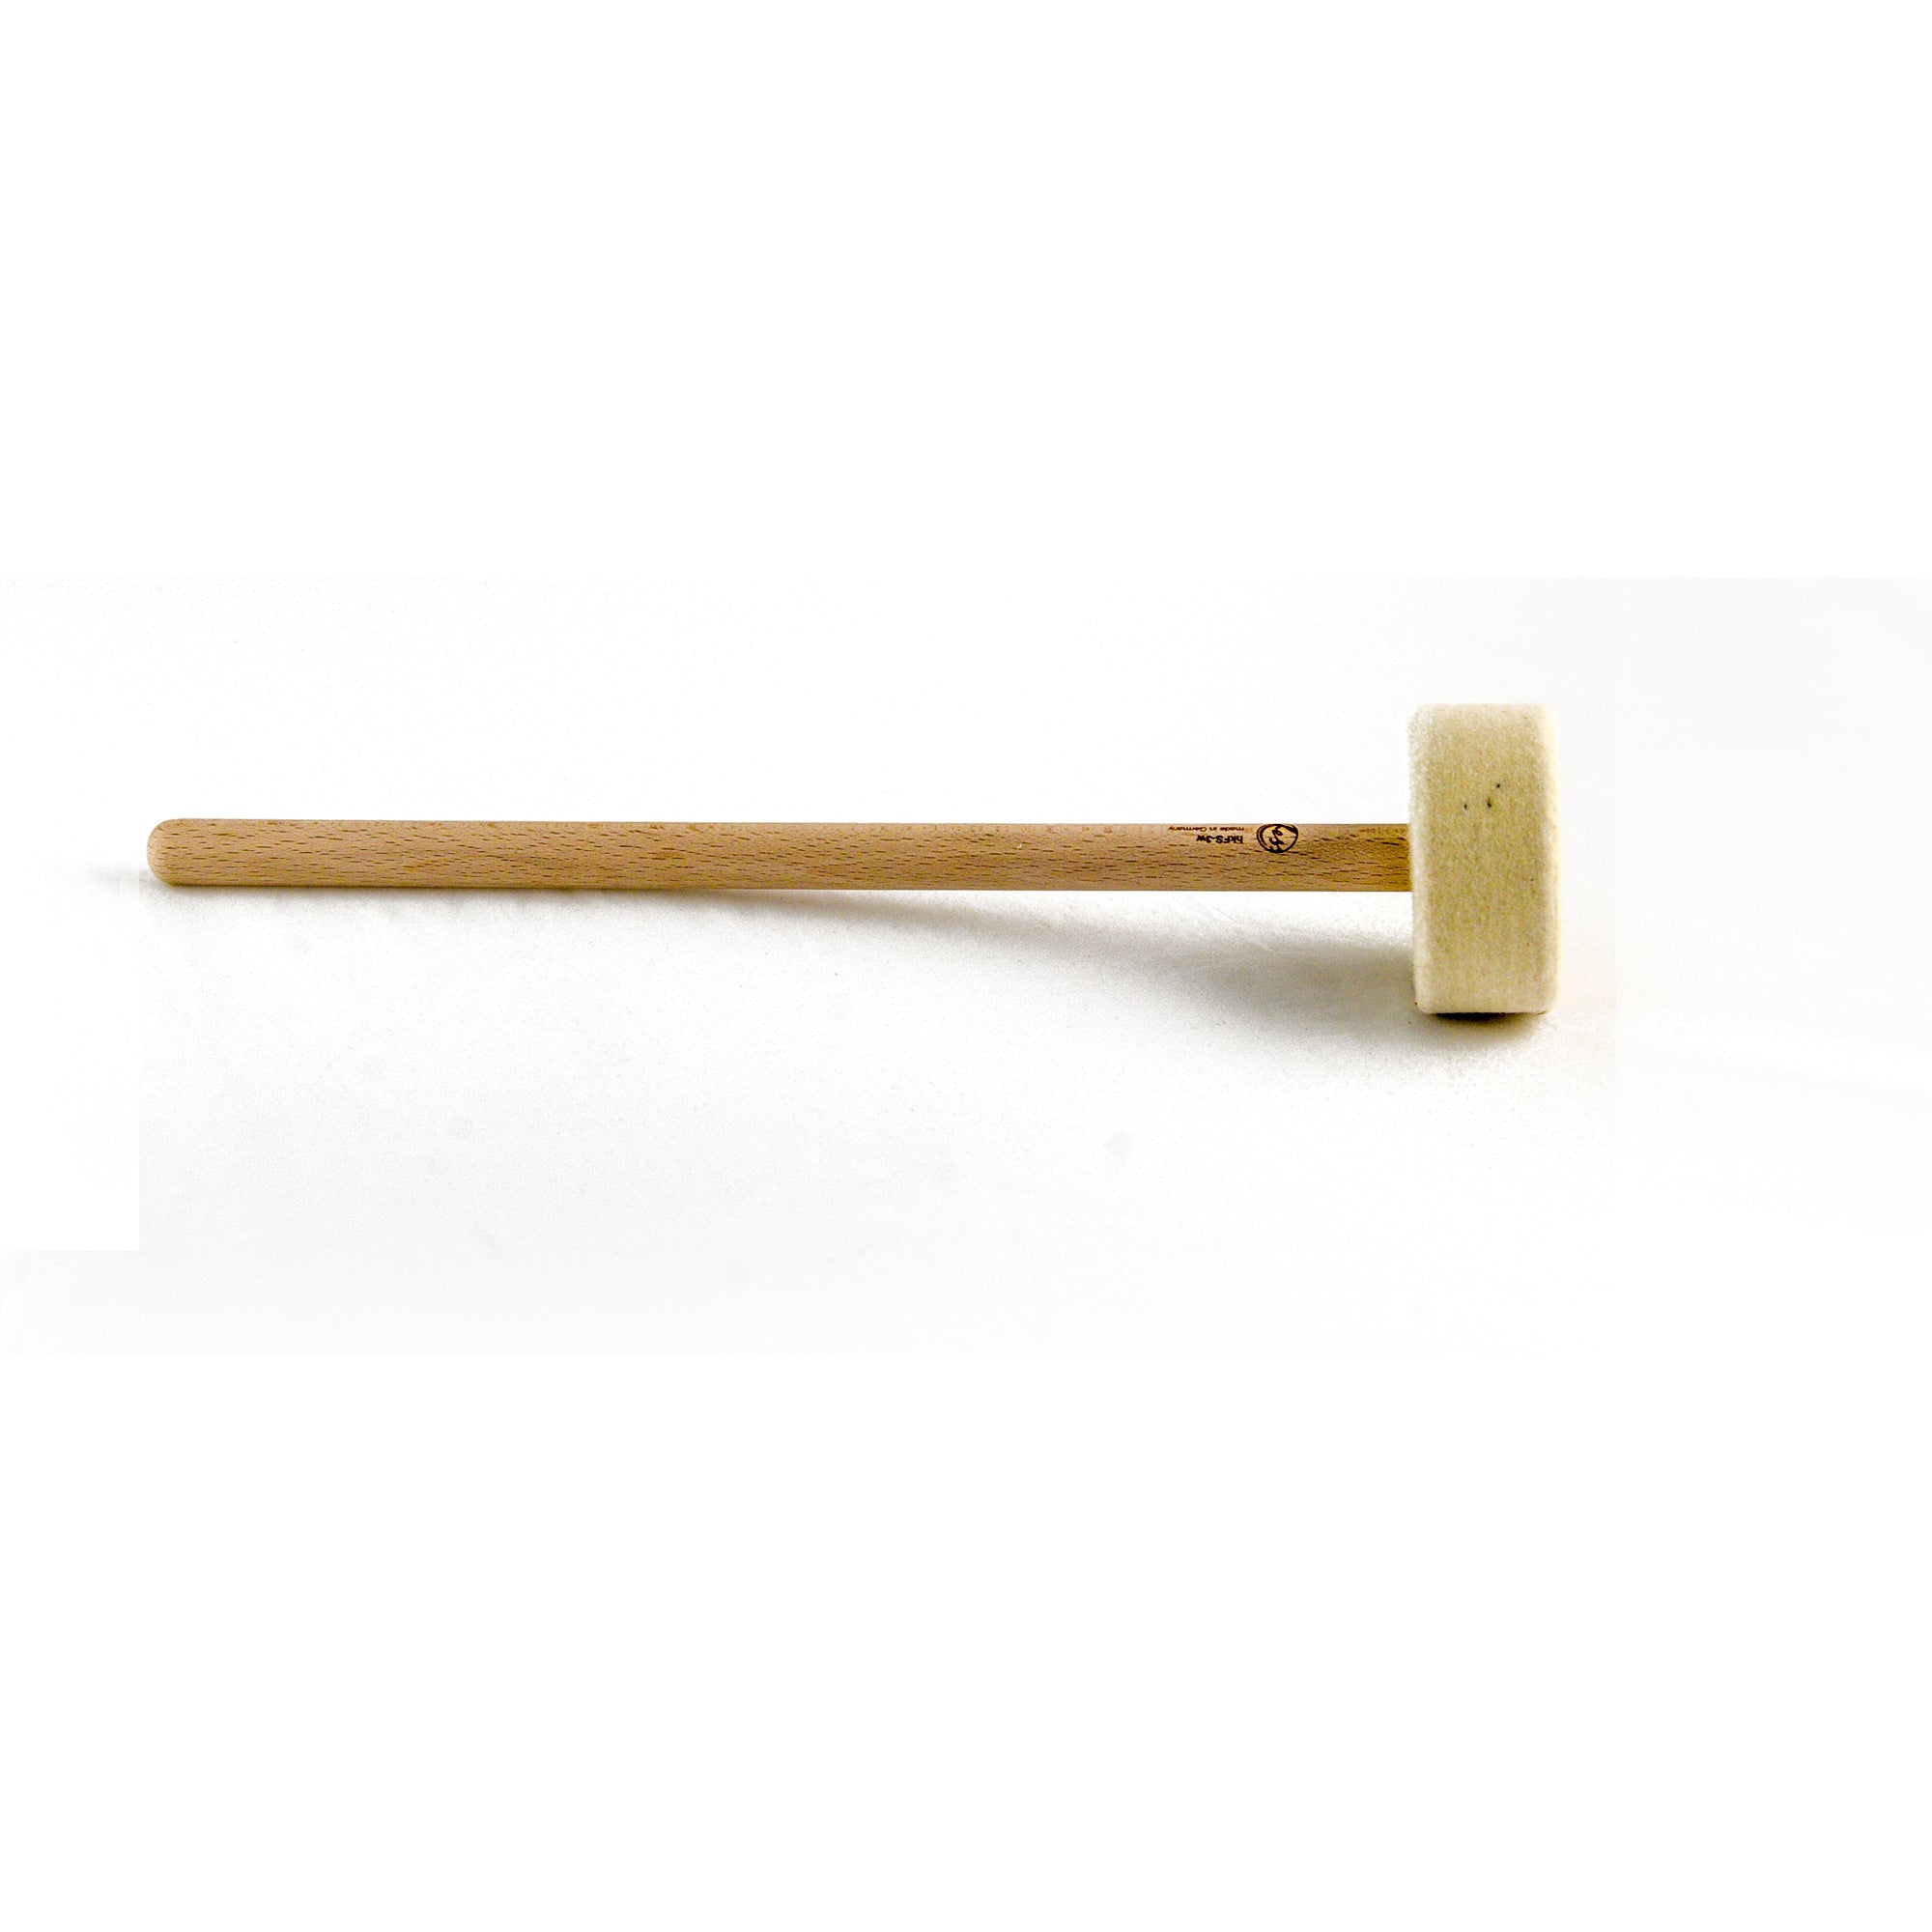 Peter Hess Mallet For Singing Bowls (Large, Soft White) - 7cm Head